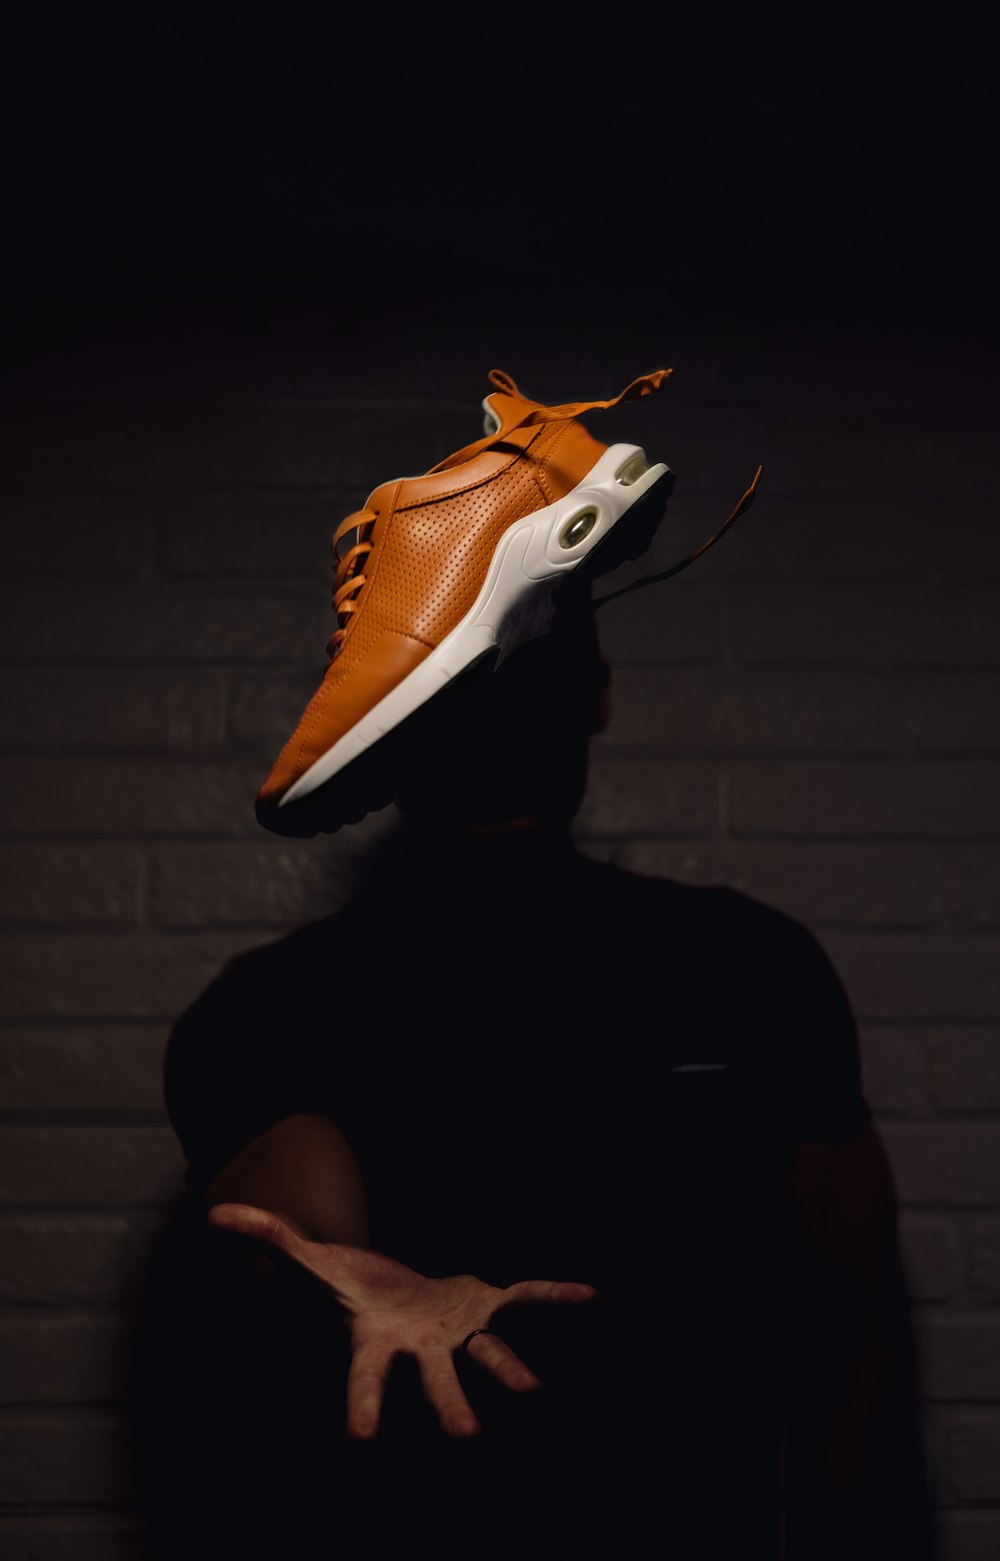 person wearing orange and white nike basketball shoes